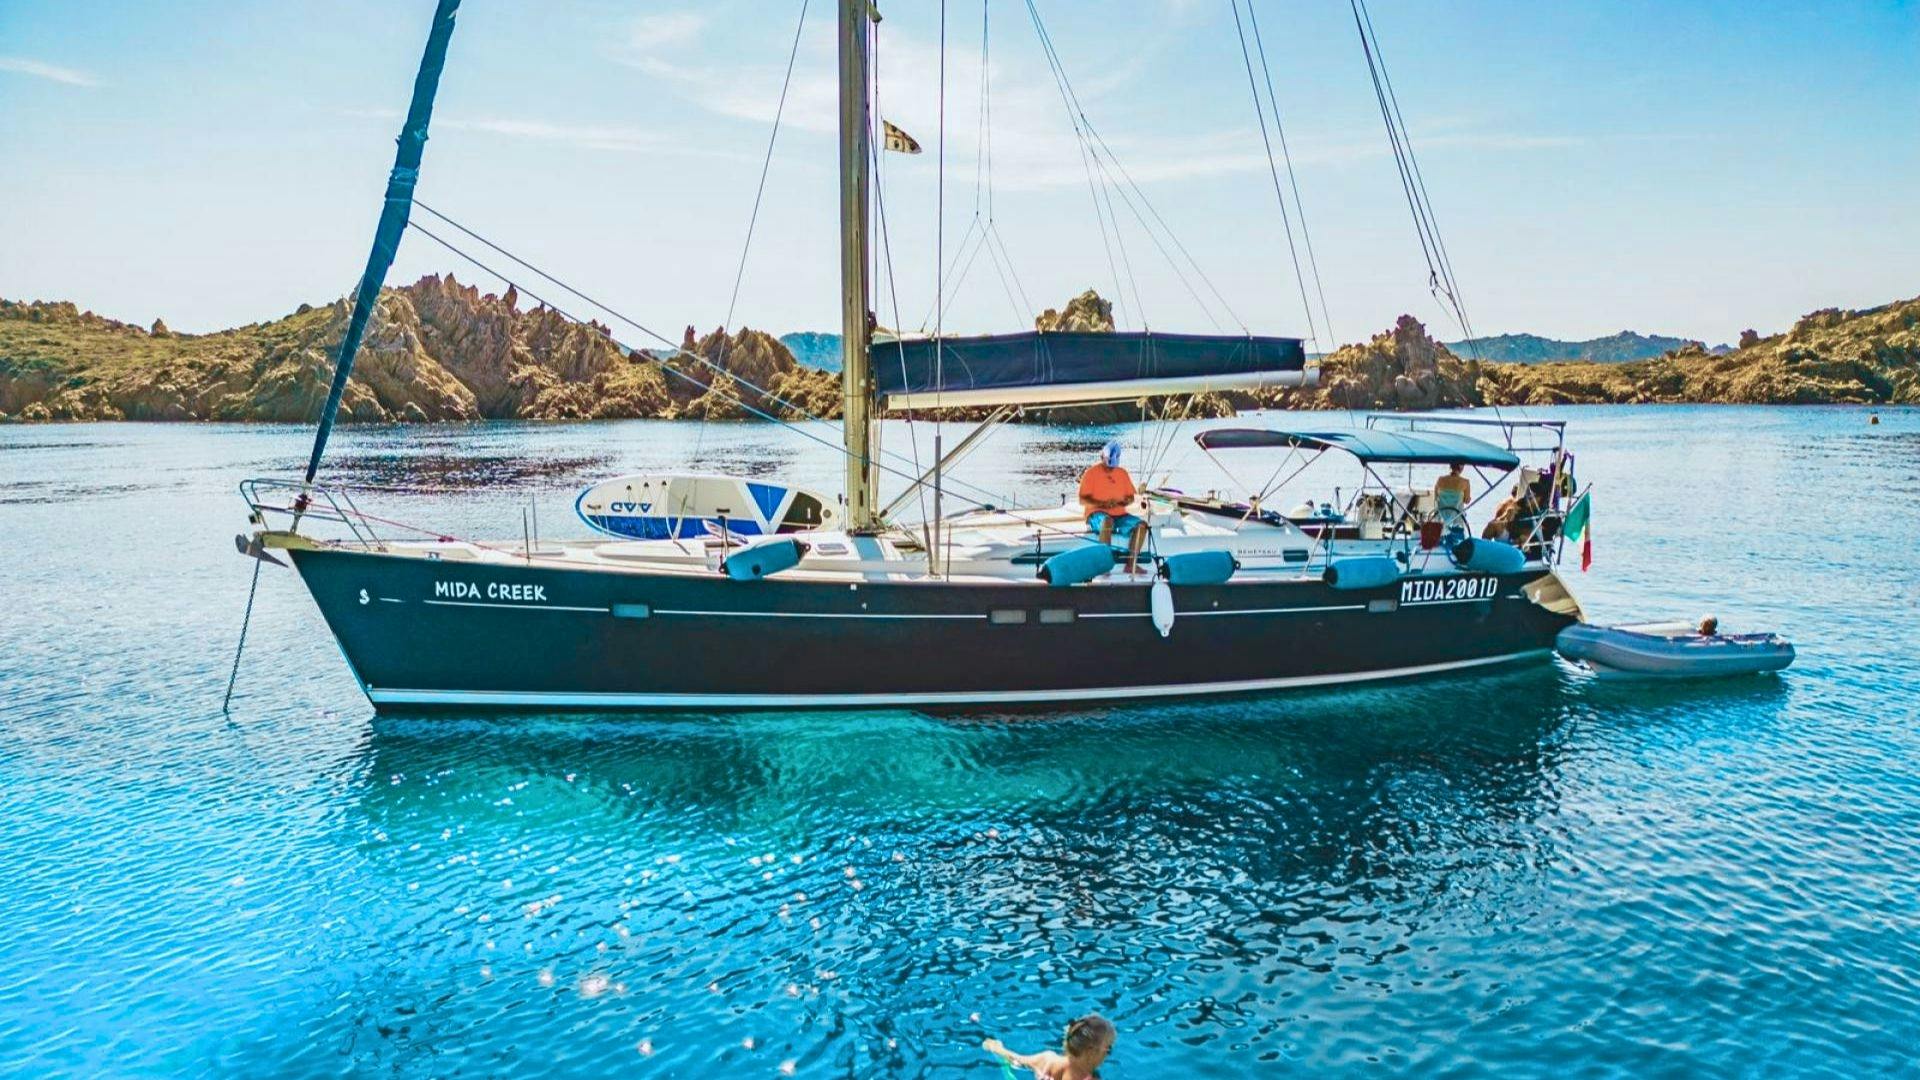 Full day sailboat tour to Corsica with lunch